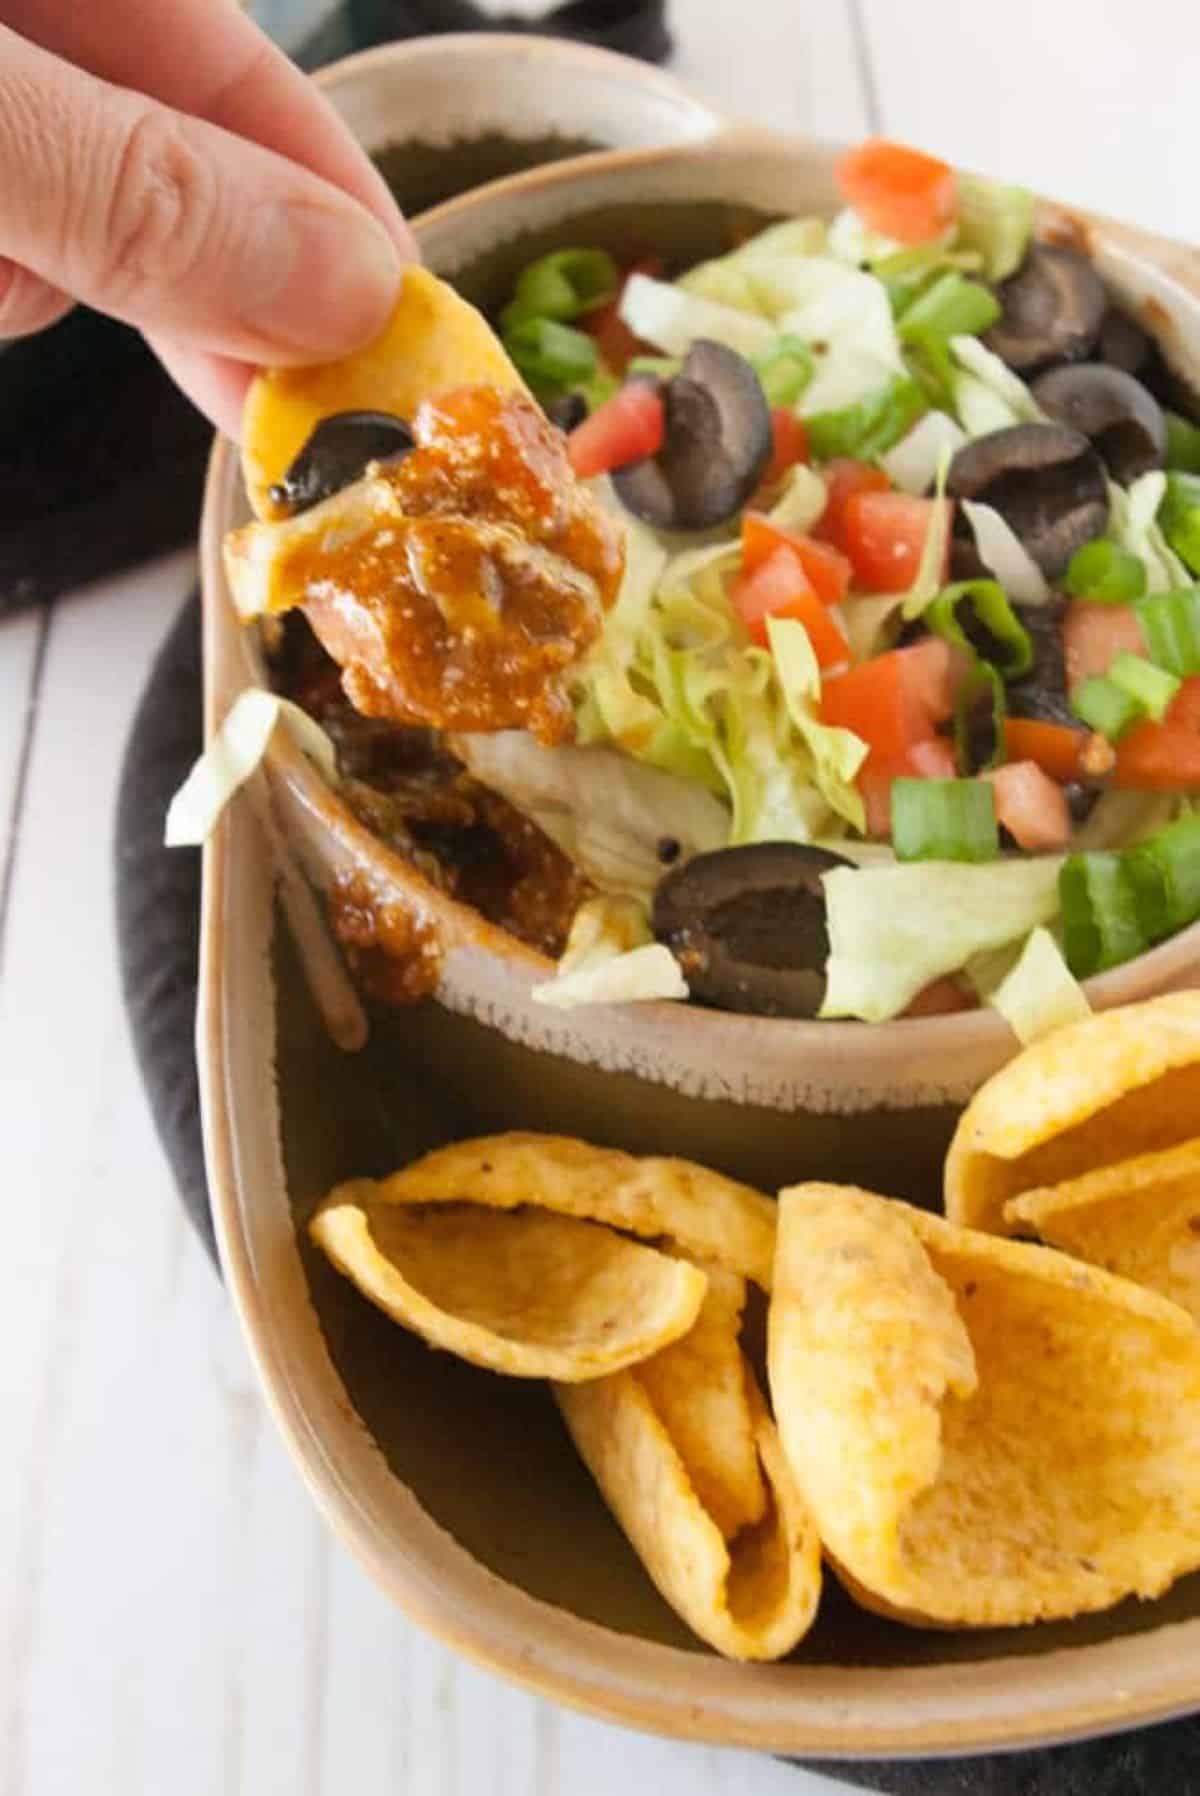 Chip dipped in a Hot Taco Chili Dip held by hand,